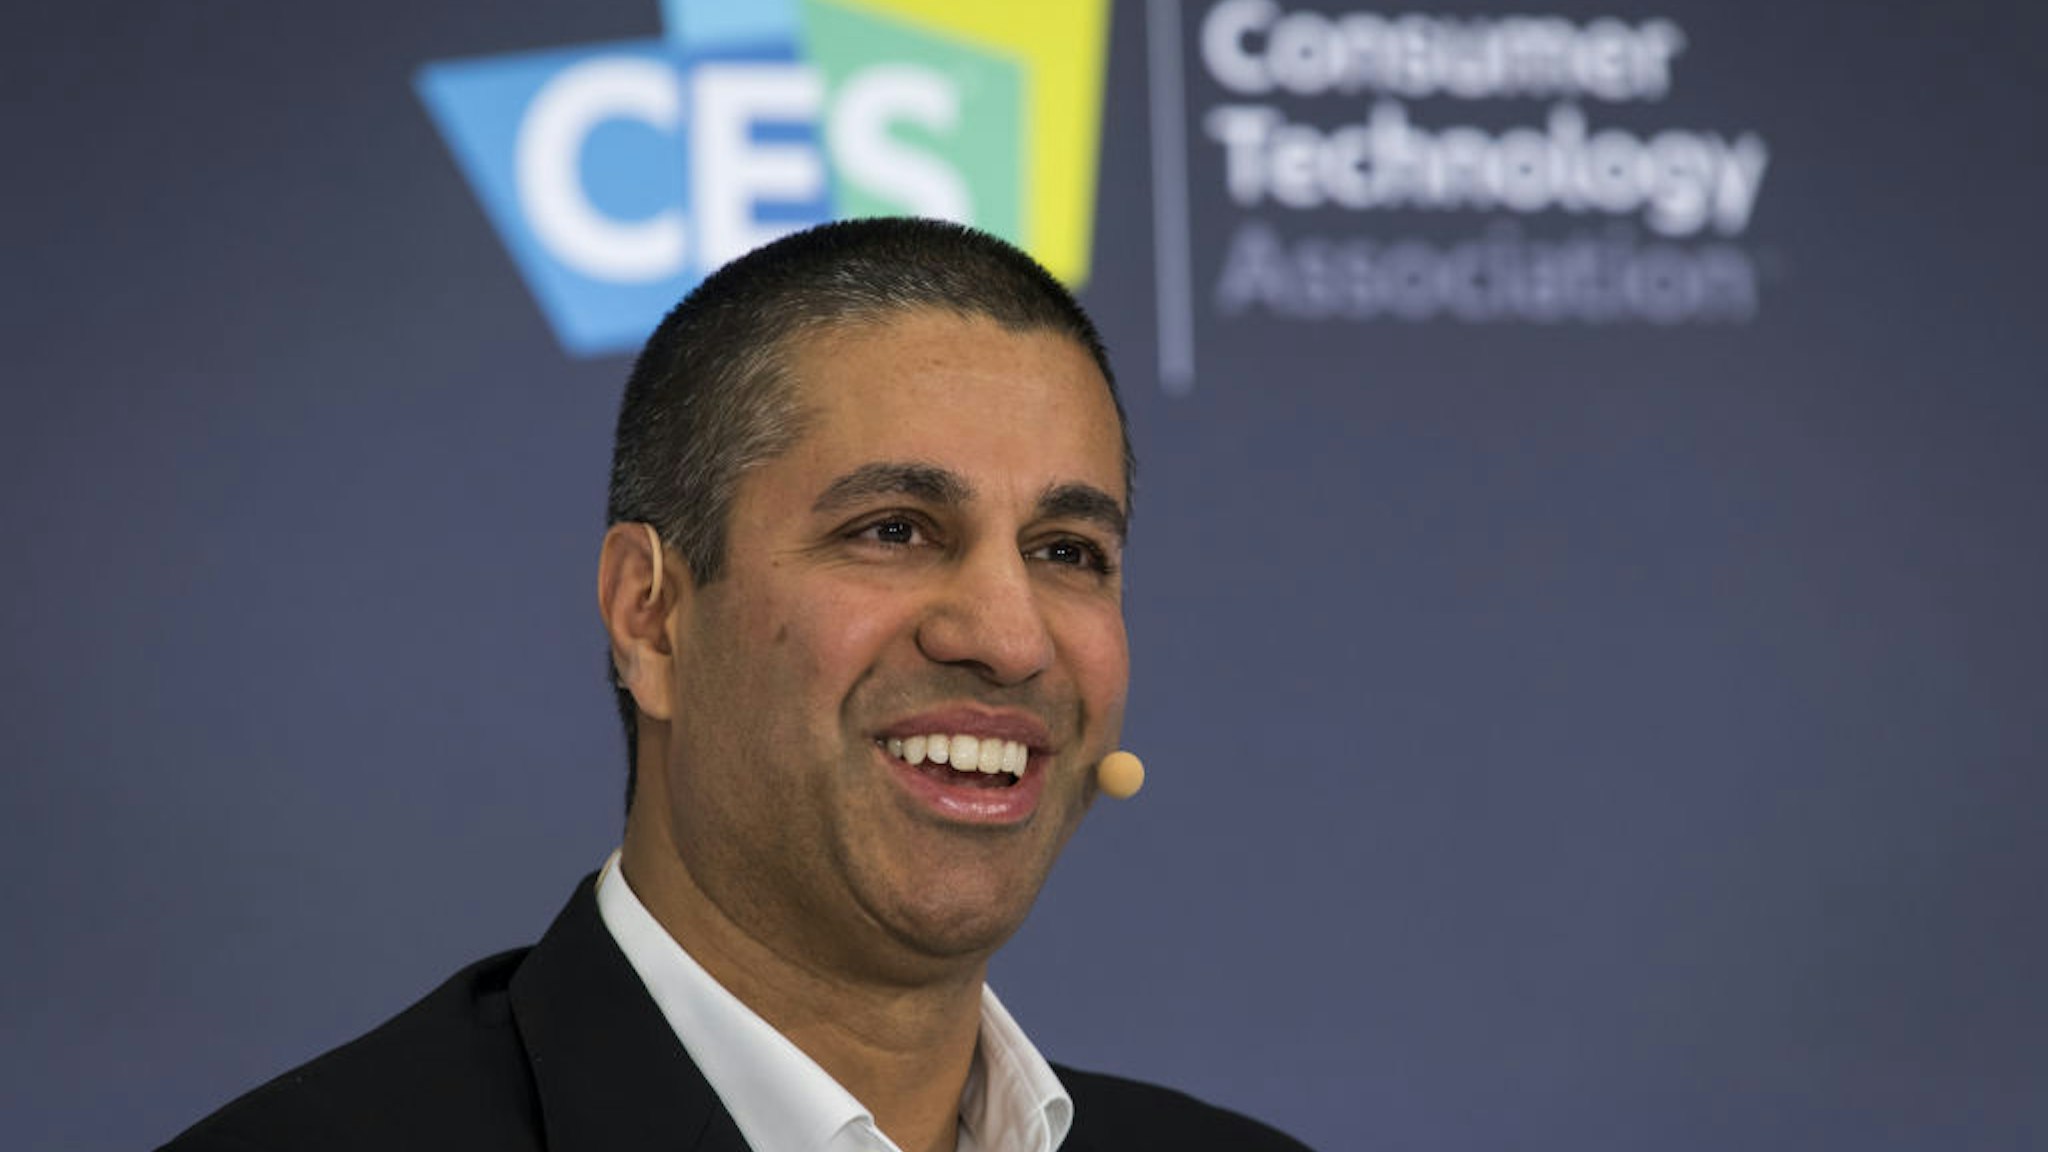 Ajit Pai, chairman of the Federal Communications Commission (FCC), speaks during a panel discussion at CES 2020 in Las Vegas, Nevada, U.S., on Tuesday, Jan. 7, 2020.